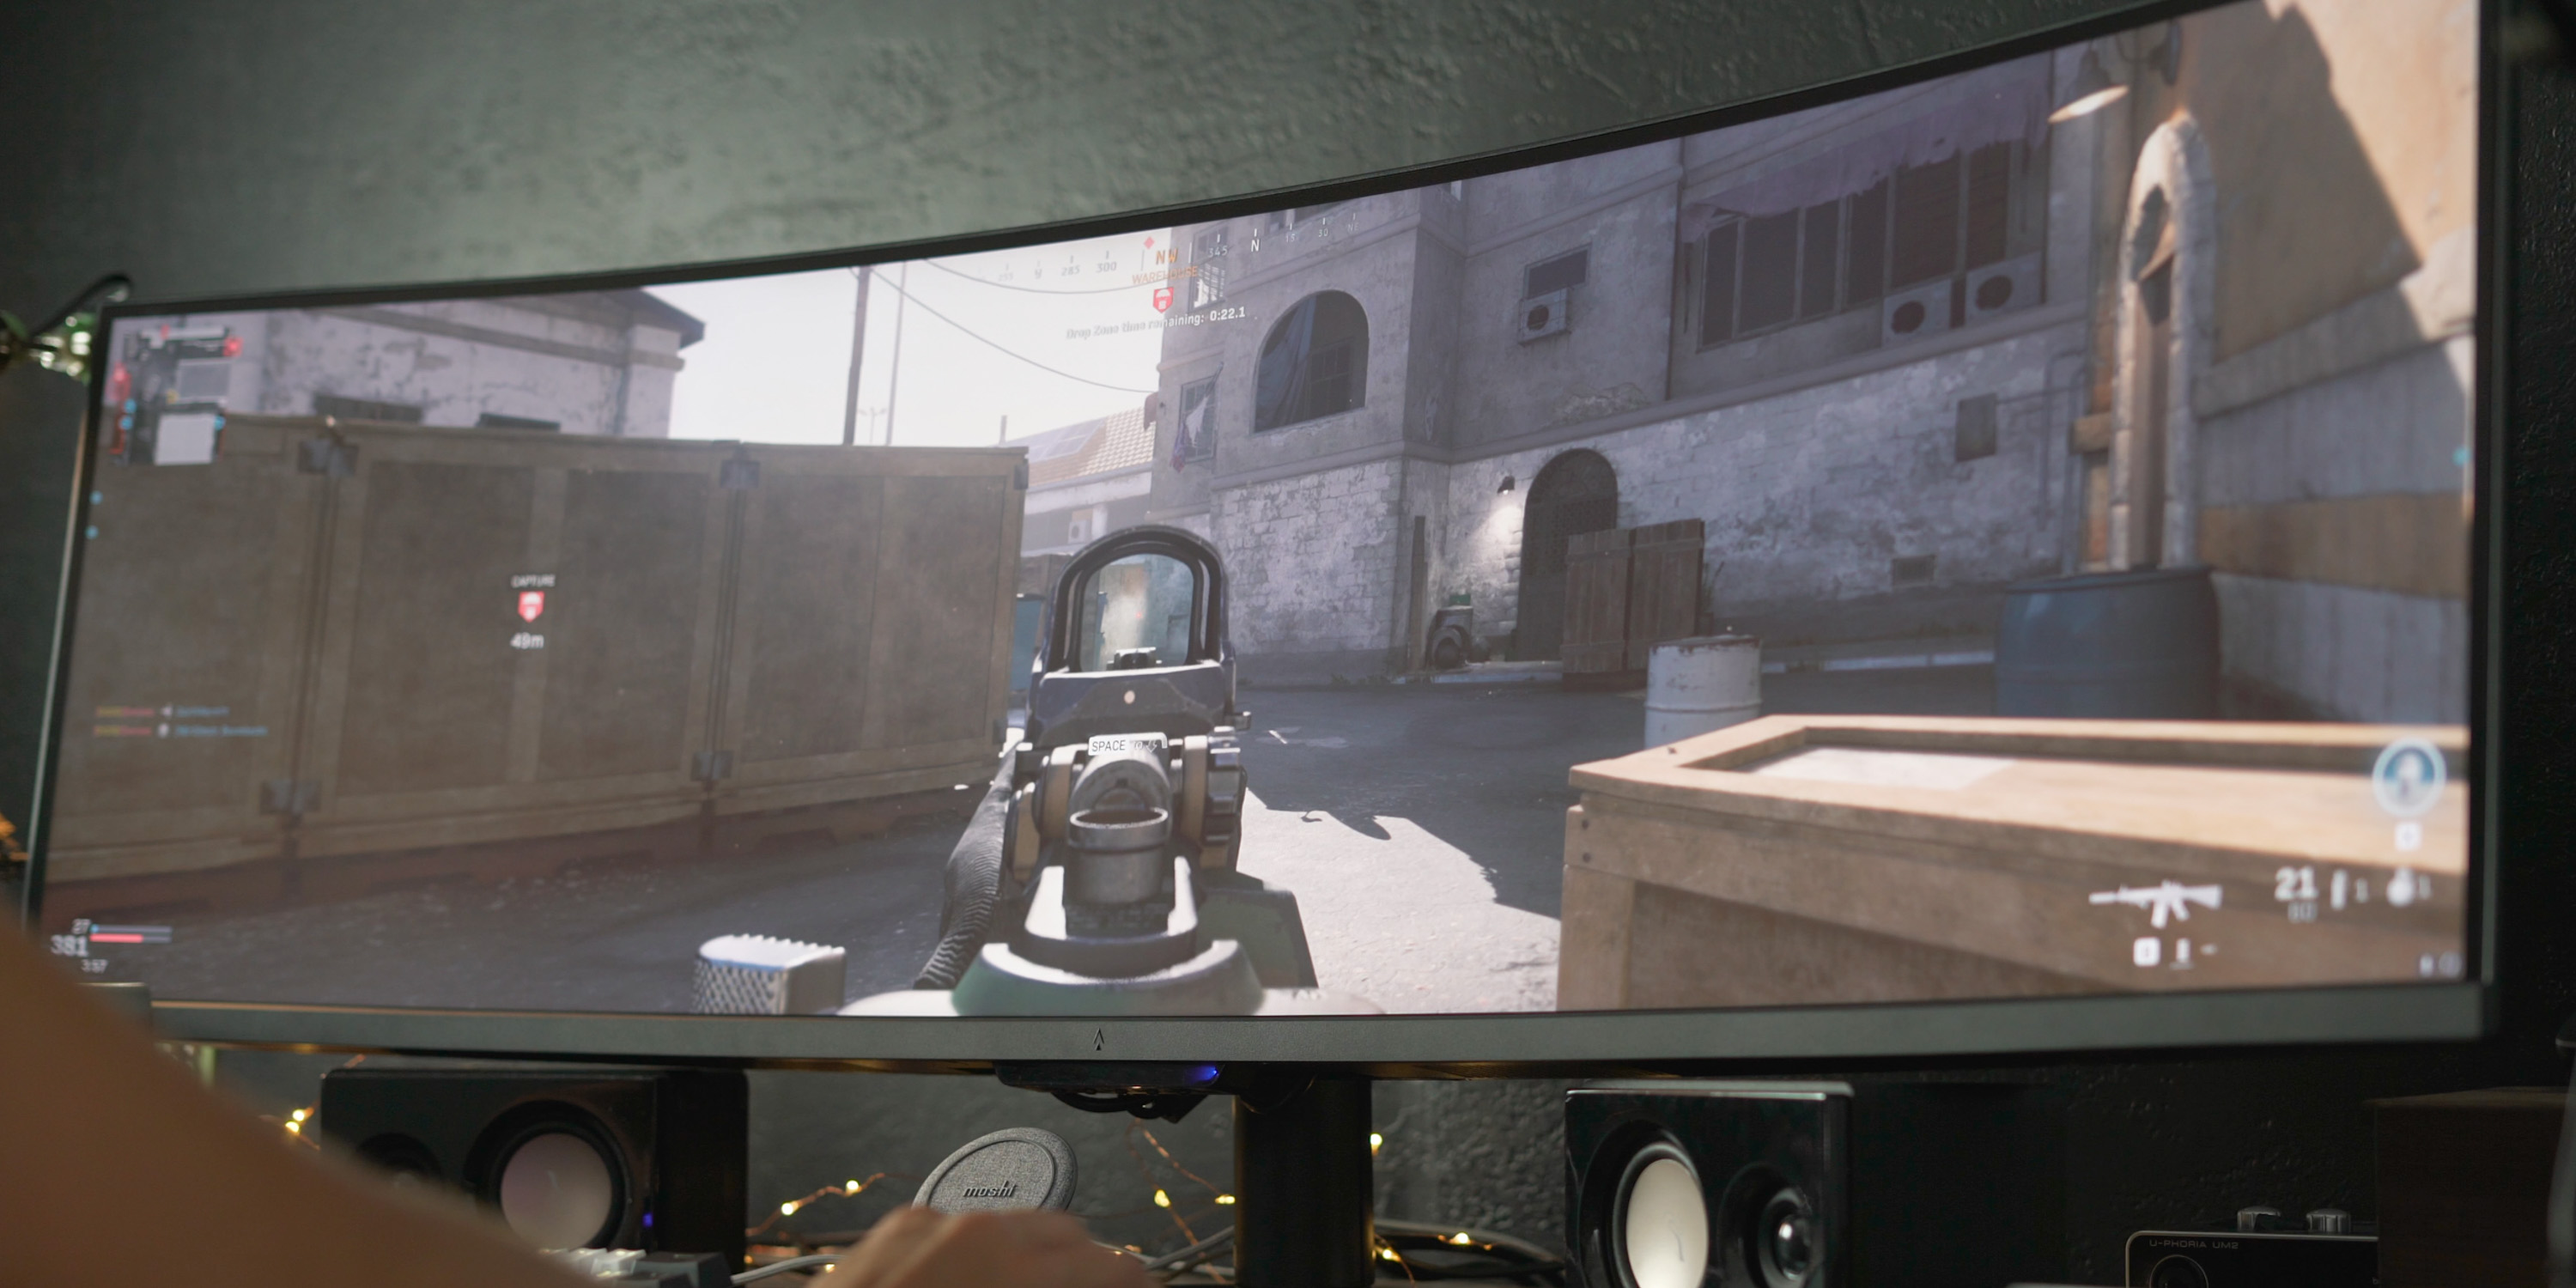 Playing Call of Duty at full resolution on the Dark Matter 49-inch gaming monitor